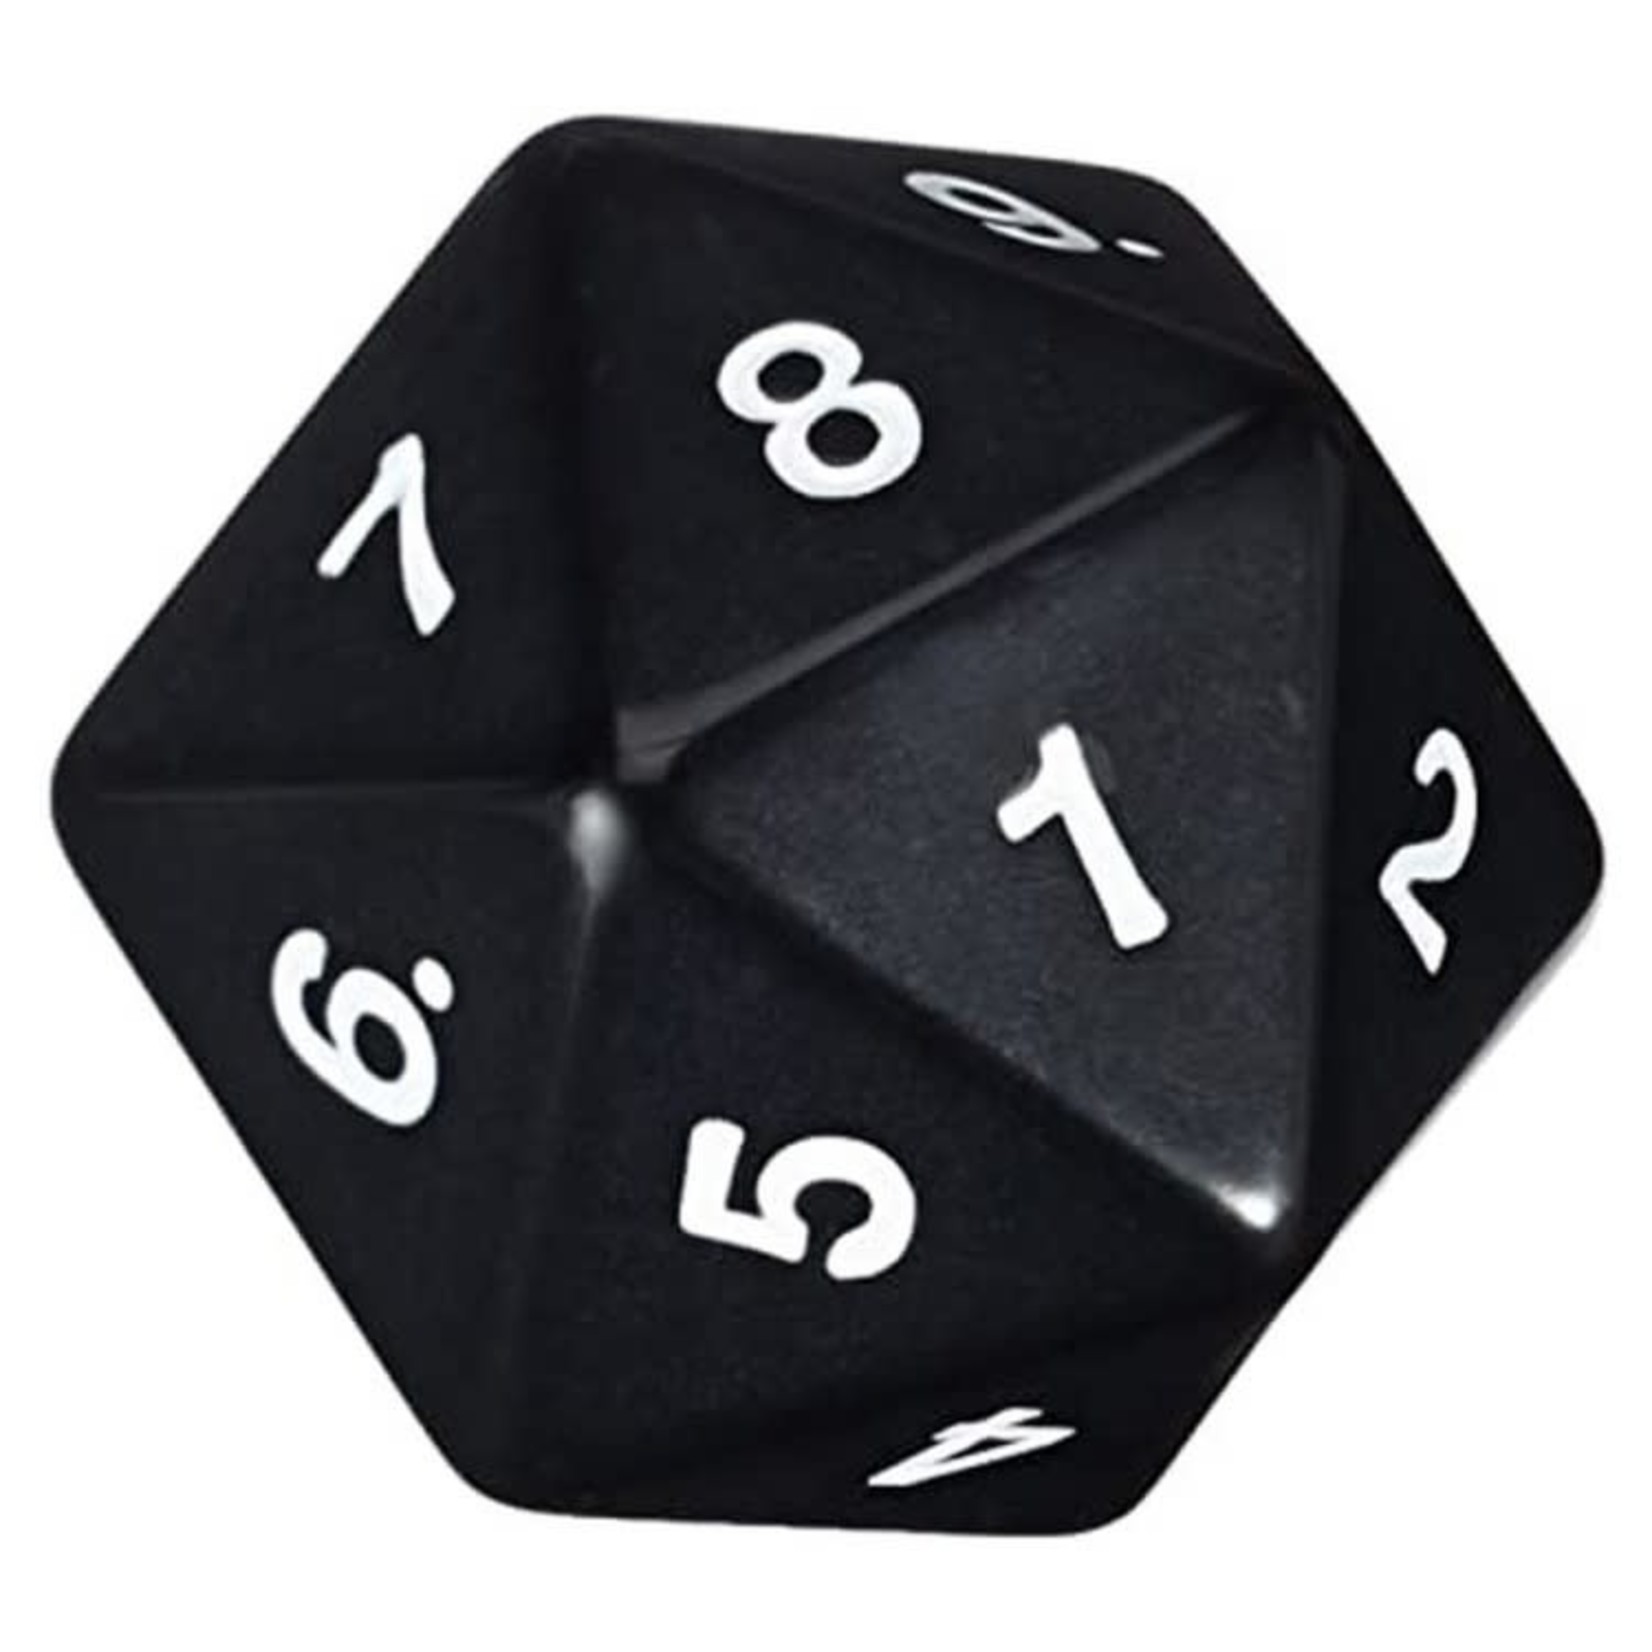 Koplow Countdown Black with White 55 mm d20